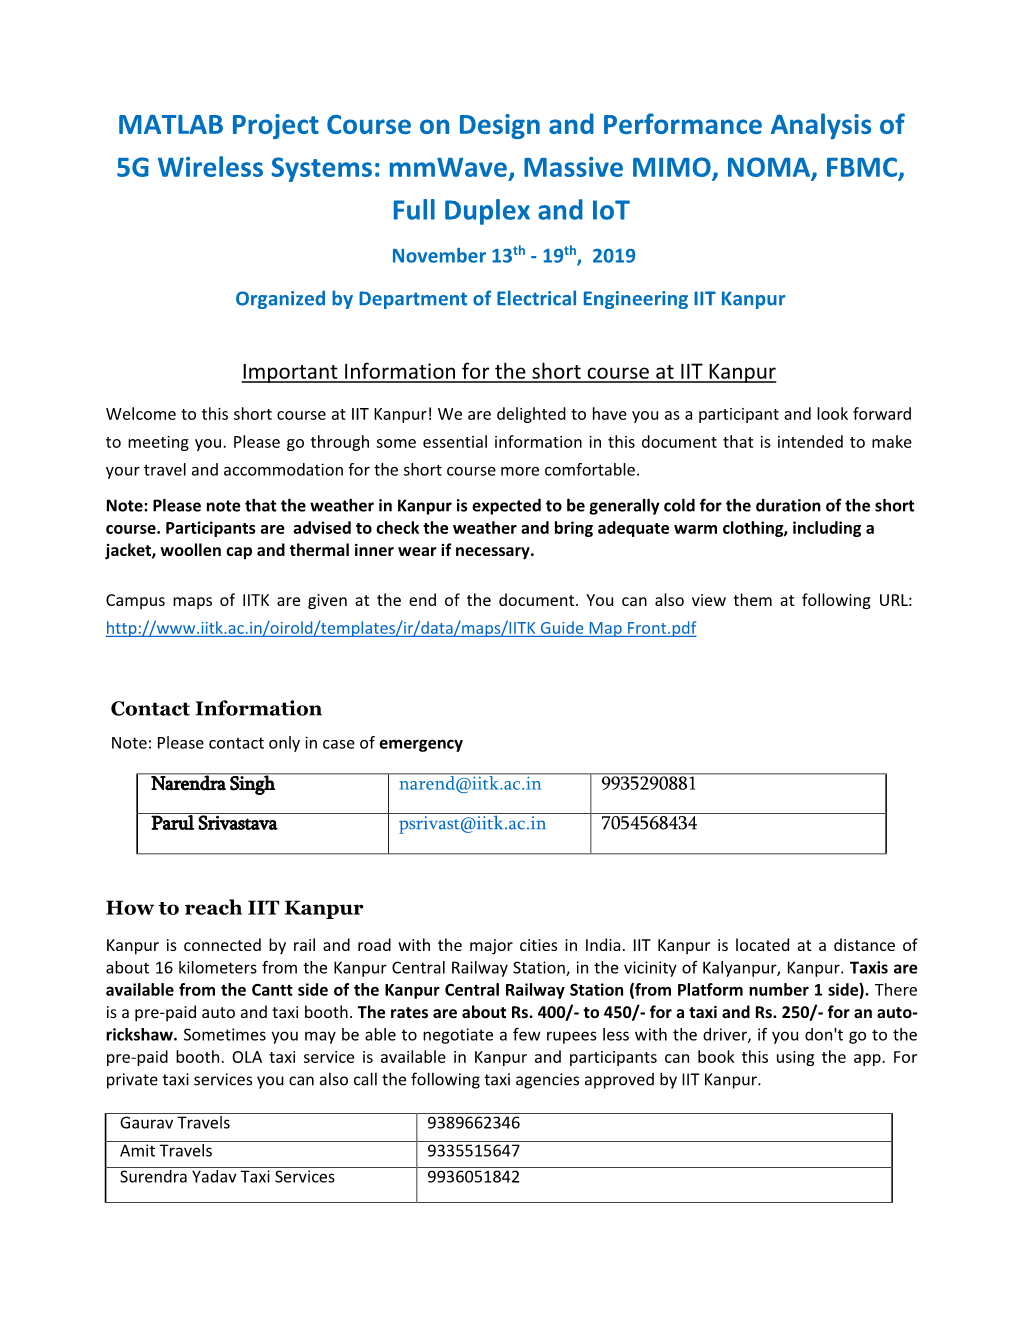 MATLAB Project Course on Design and Performance Analysis of 5G